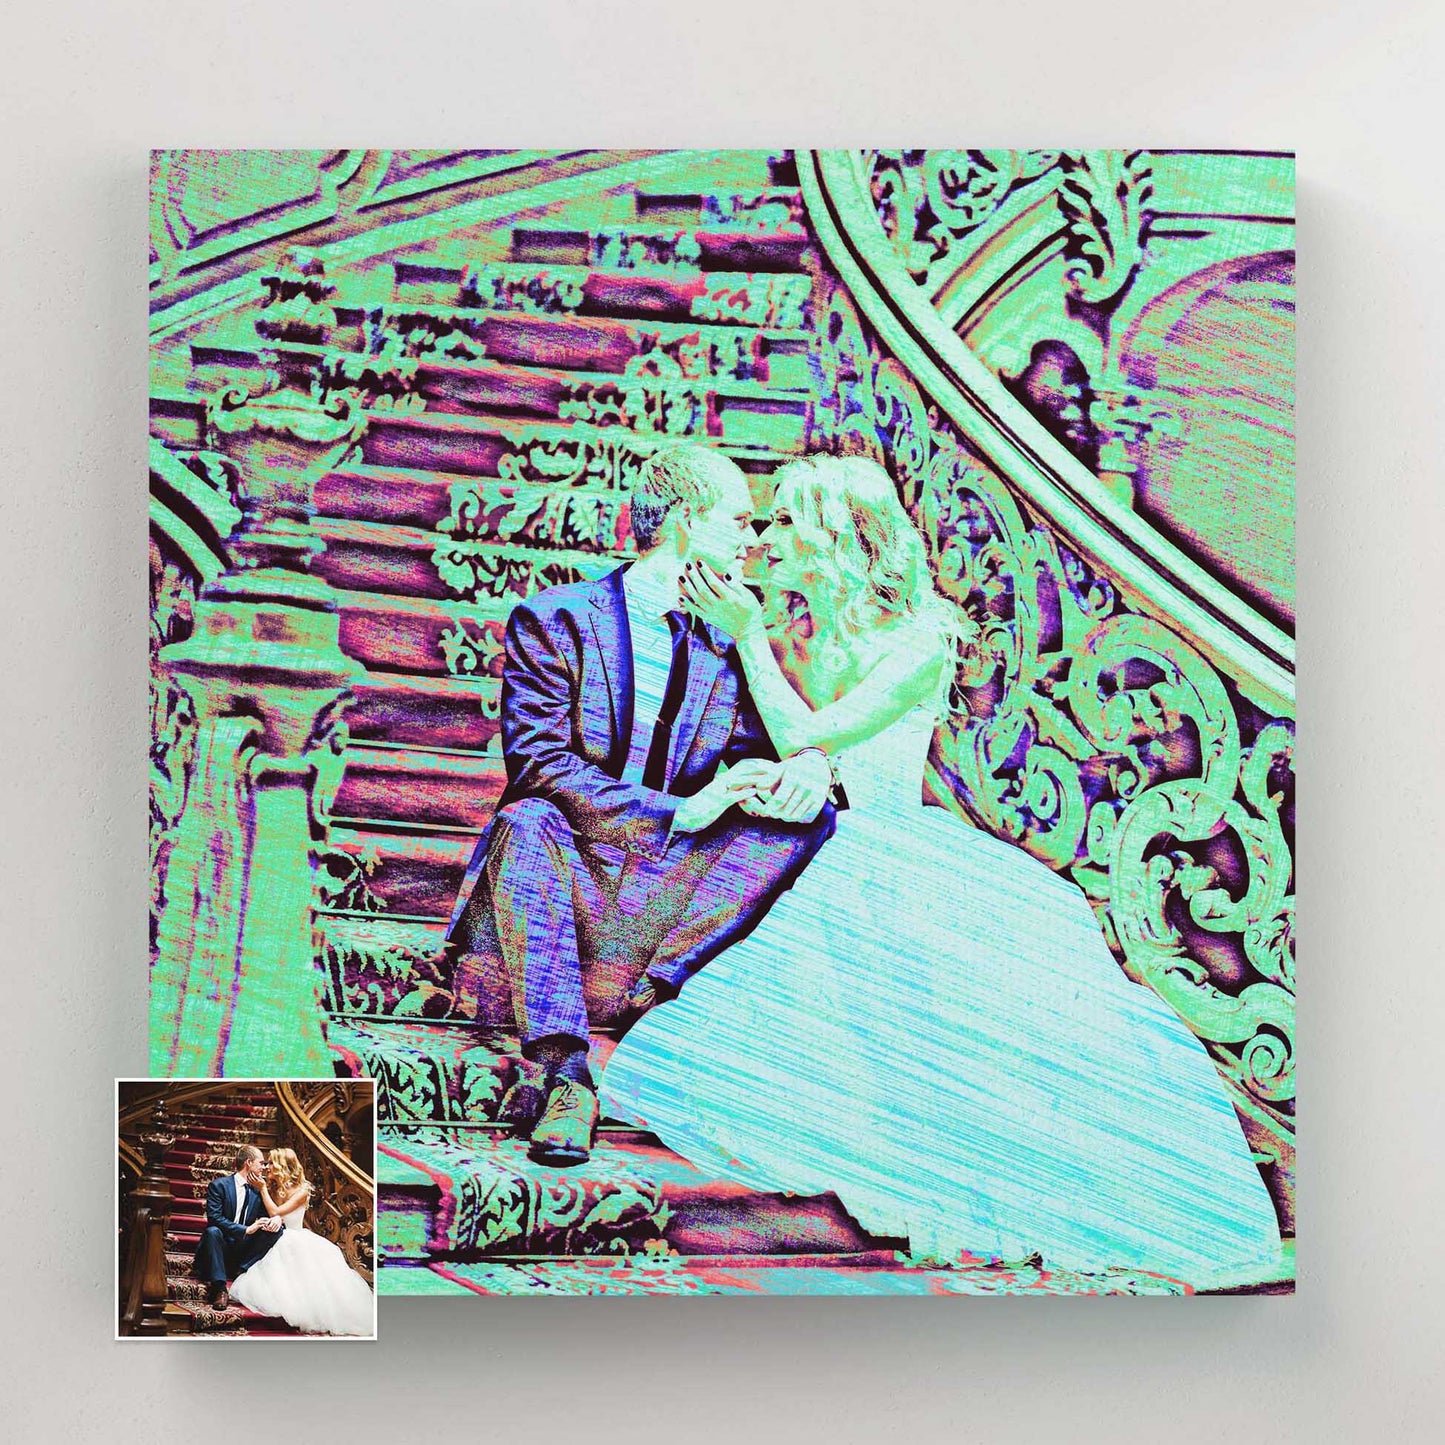 Make a statement with our Personalised Blue Drawing Canvas. This trendy and hip painting, printed on handmade canvas, features vibrant colors and an original design. It's a creative gift idea that will leave friends and family in awe 